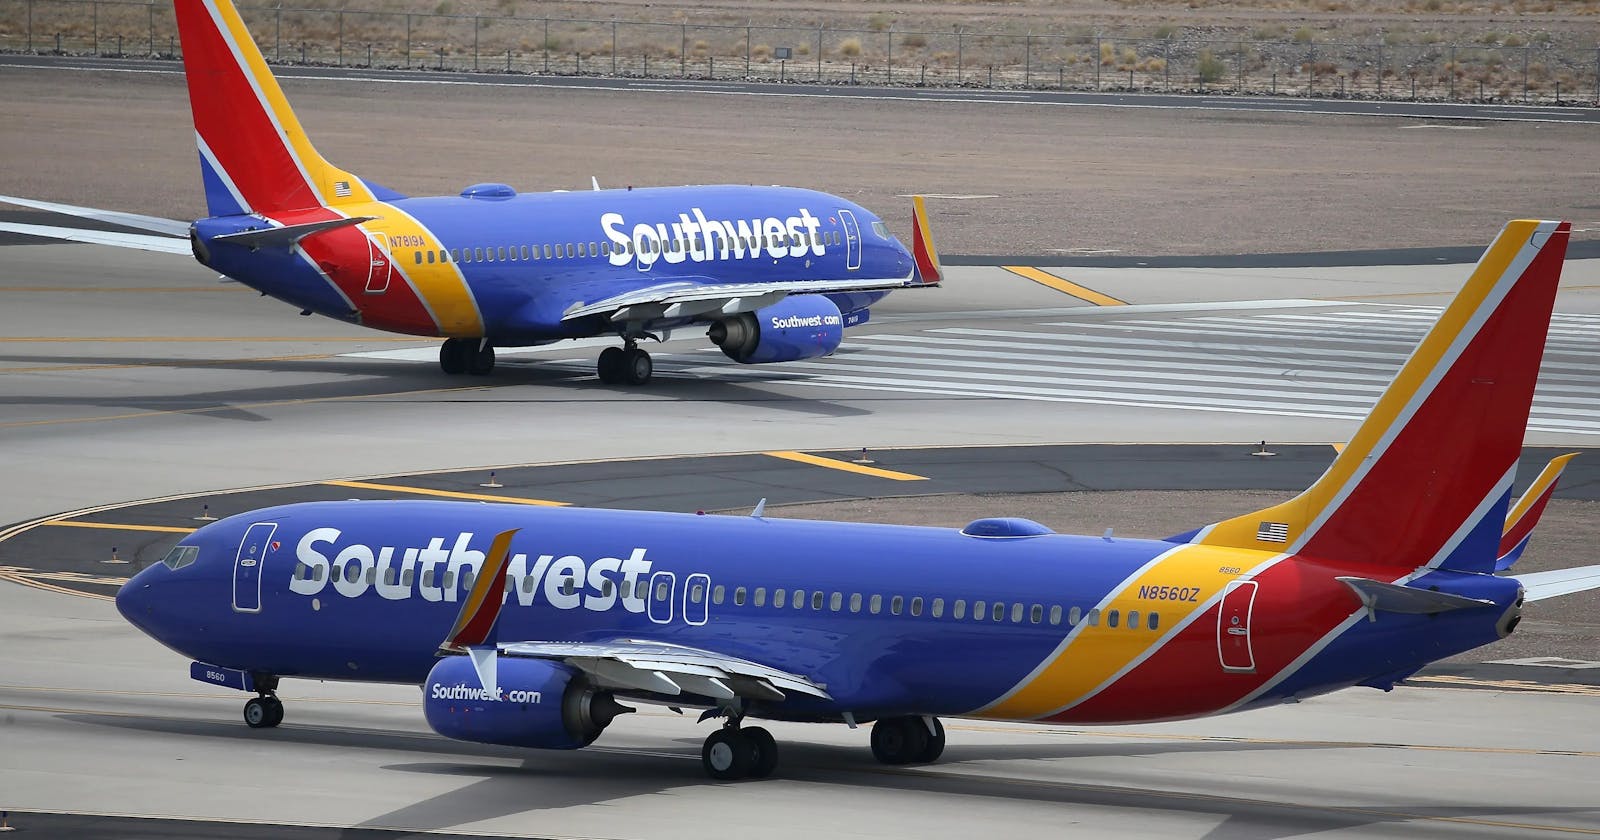 iflyswa.com and how to take advantage of the great deals that Southwest Airlines offers